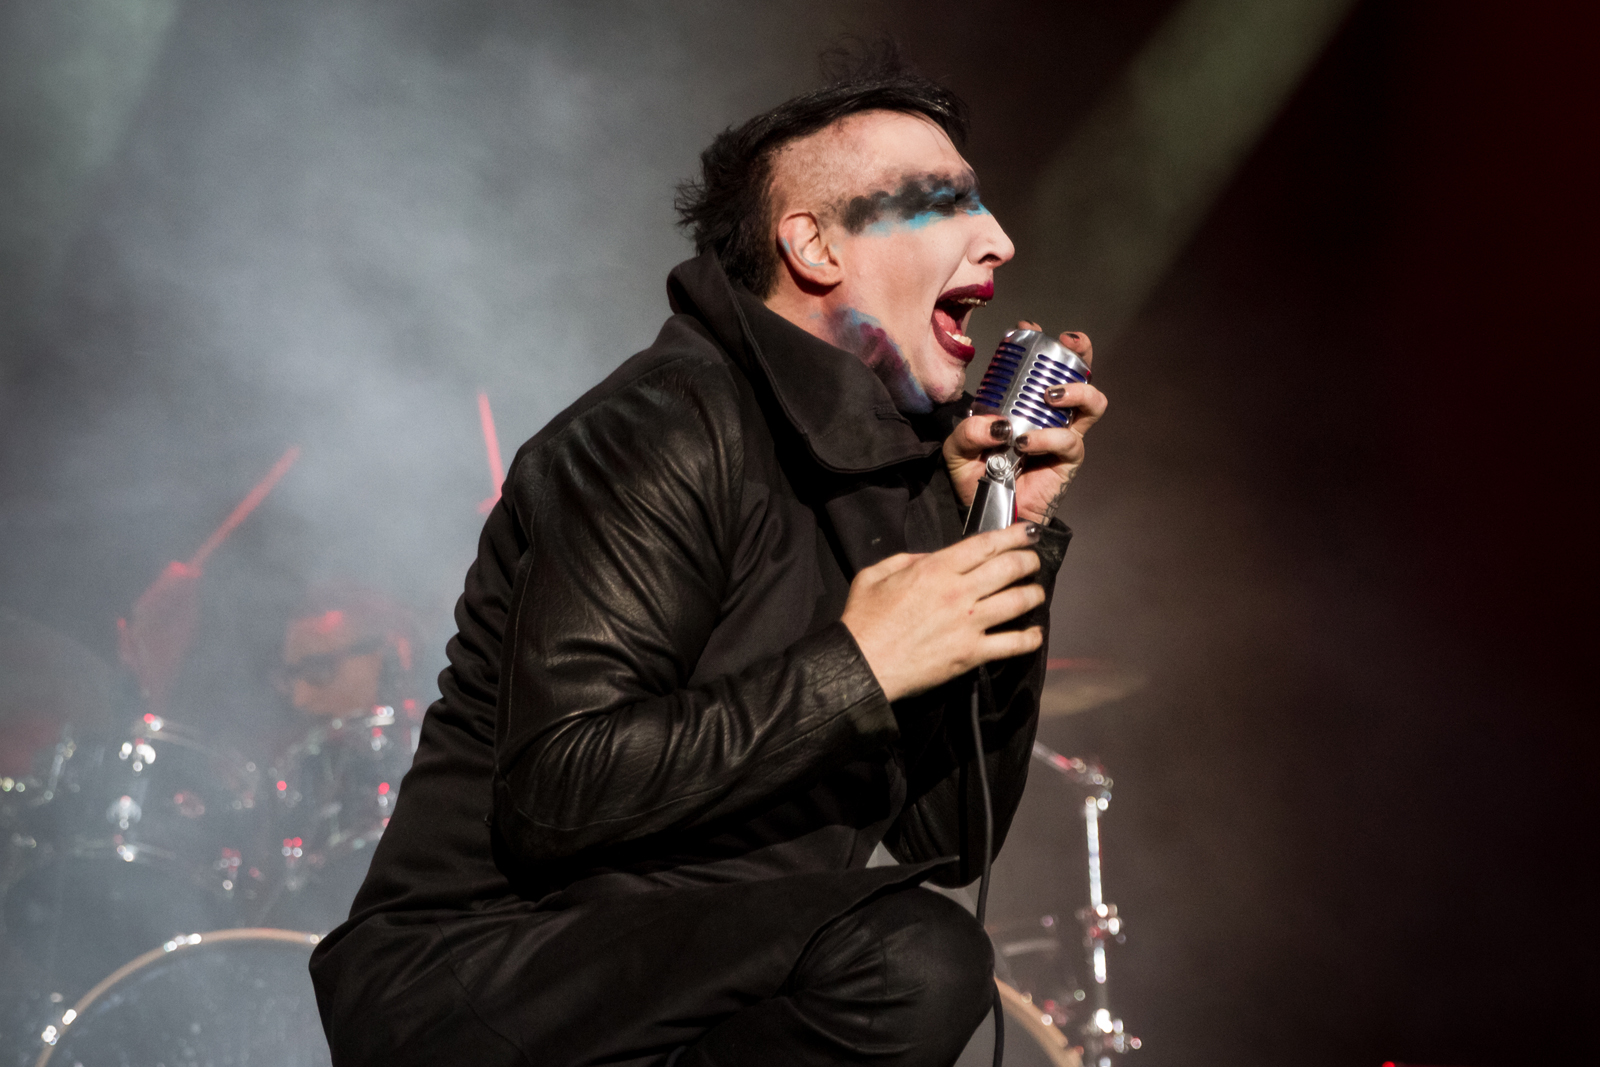 Macintosh HD:Users:brittanyloeffler:Downloads:Upwork:Marilyn Manson:19-He-suffers-from-a-very-real-heart-condition.jpg